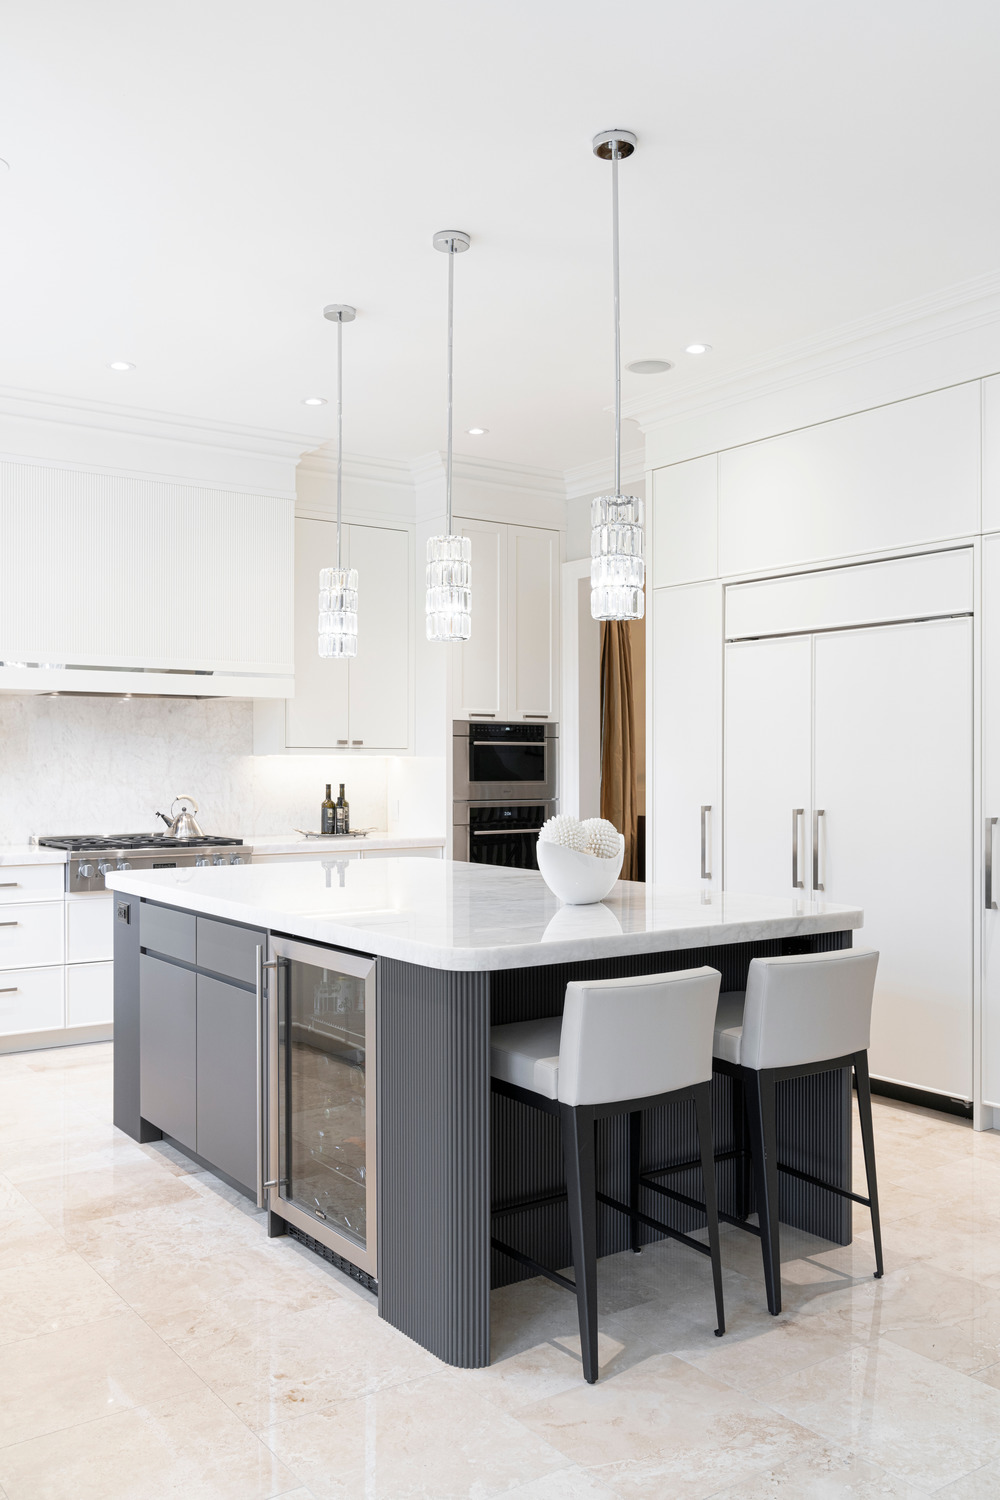 Cameo Kitchens and Fine Cabinetry transforms a simple kitchen into a signature design statement